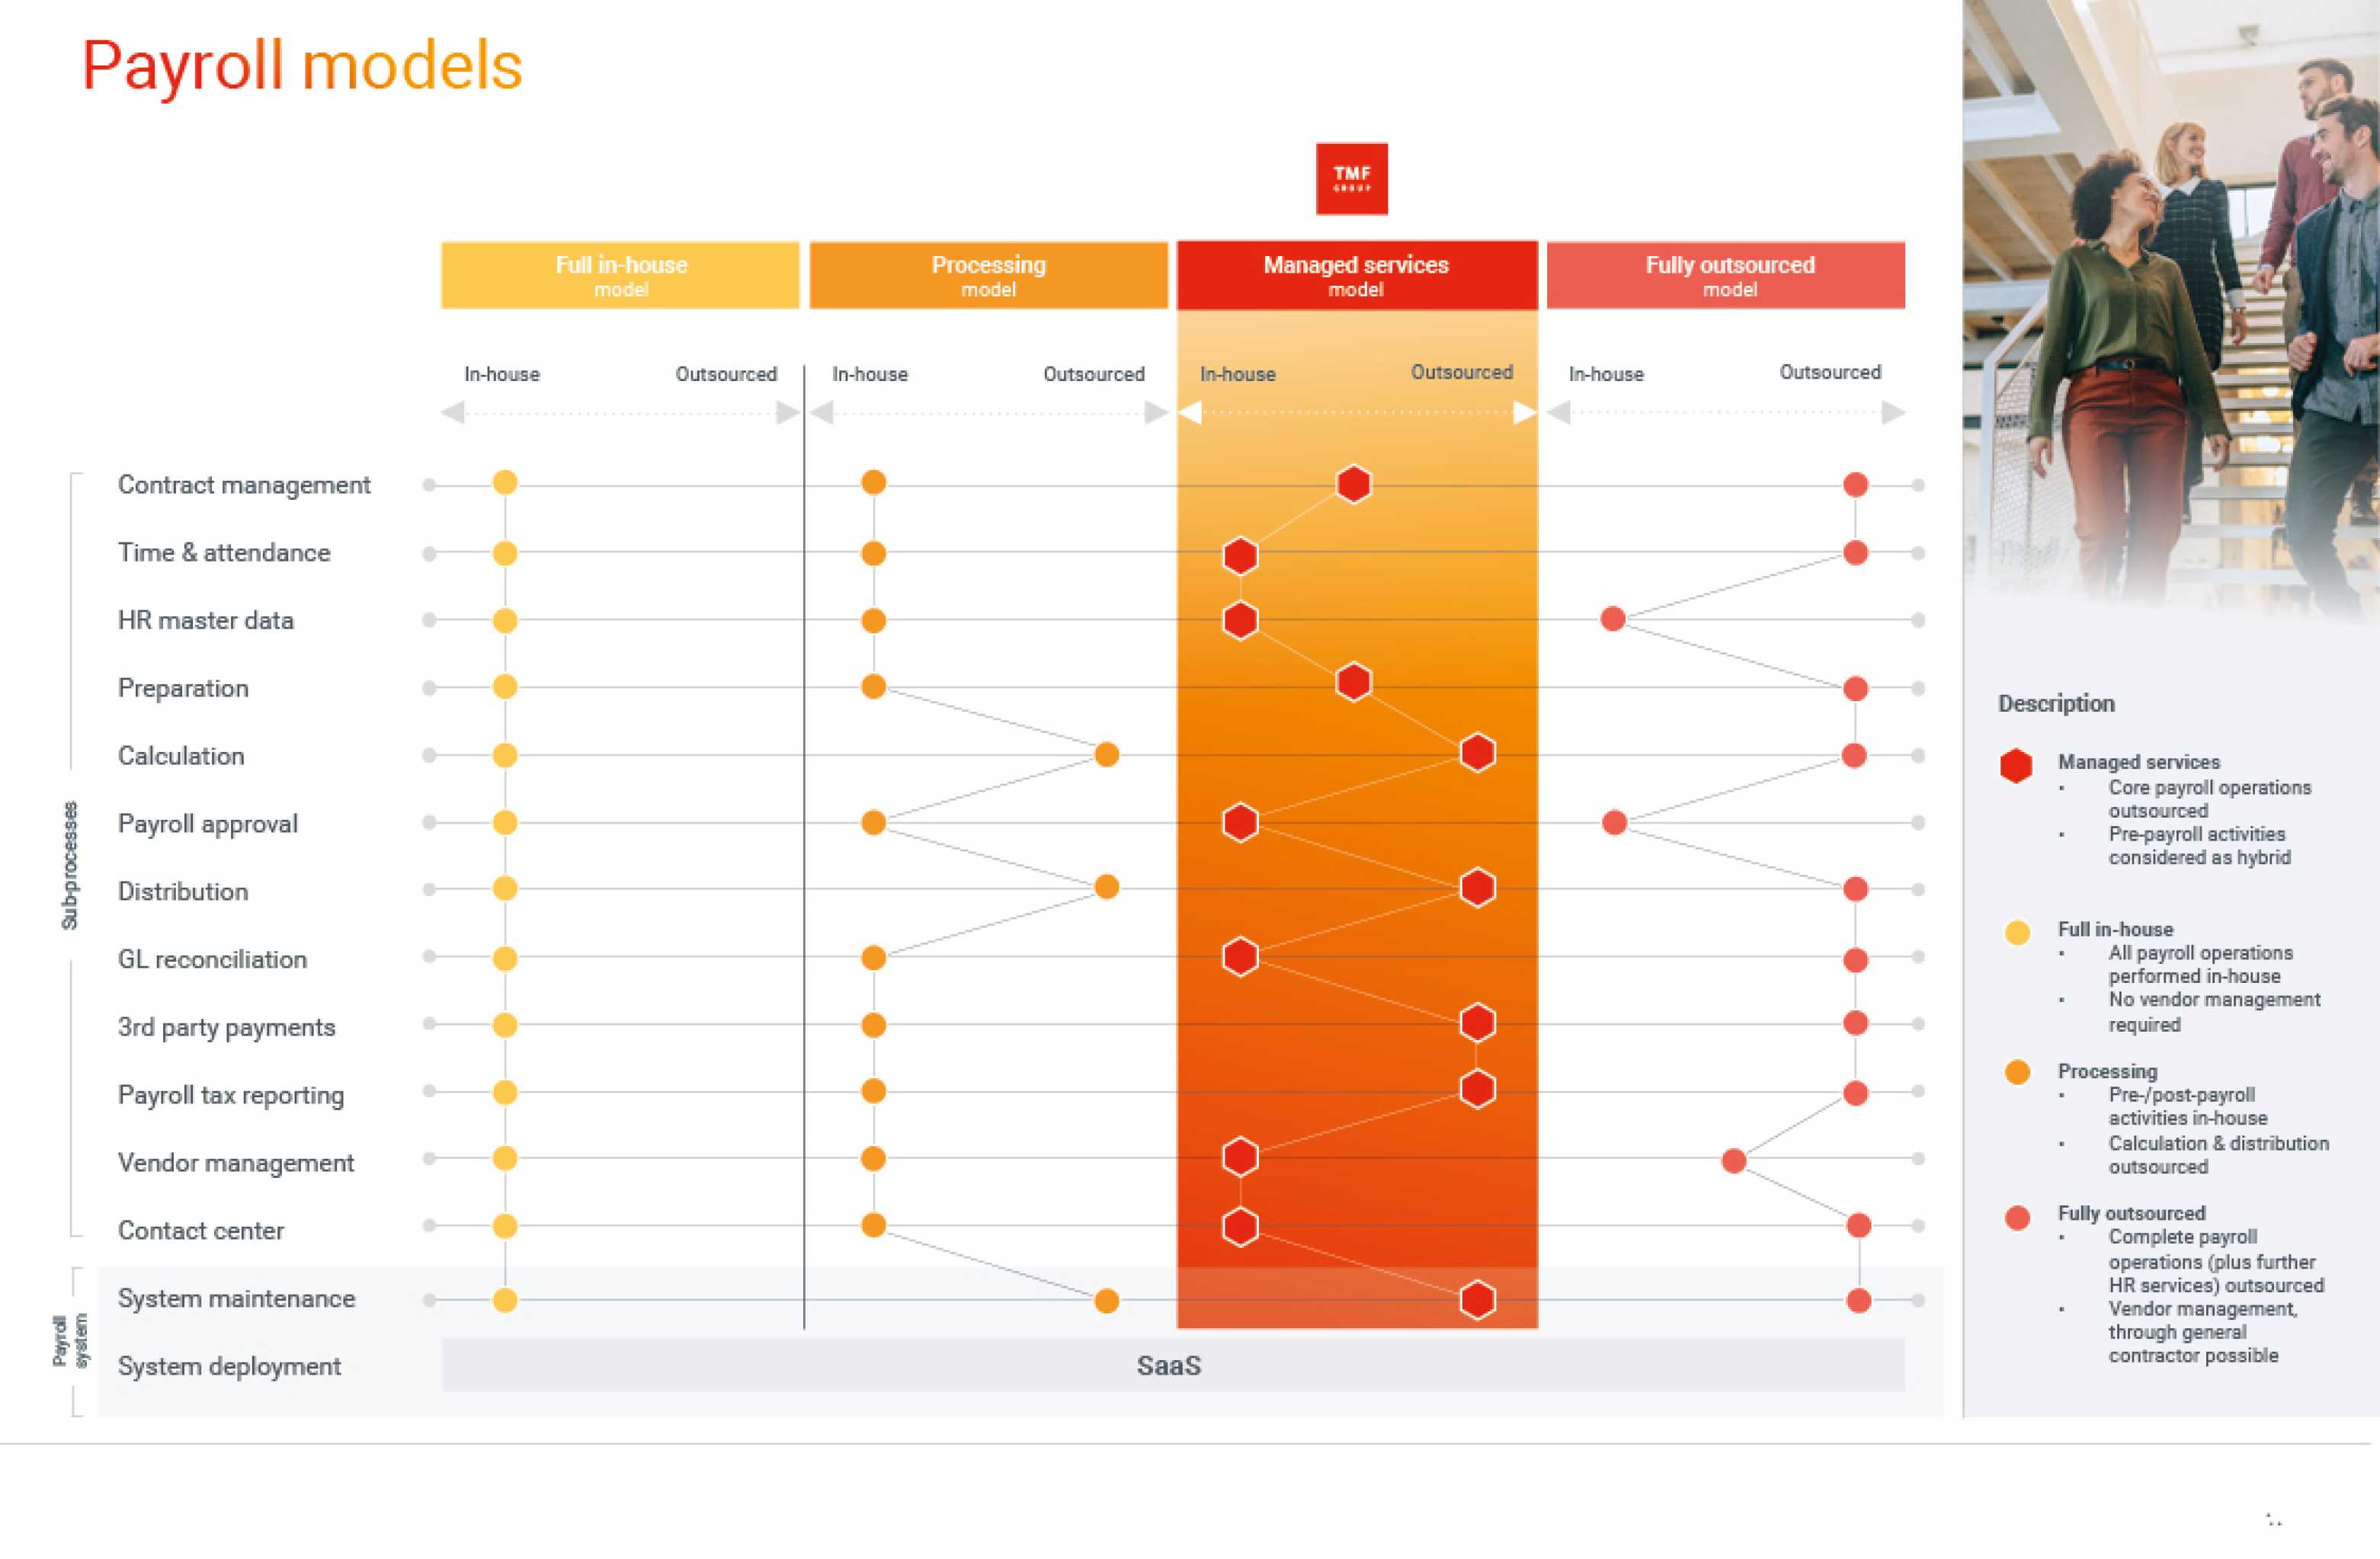 graph comparing the different types of payroll models